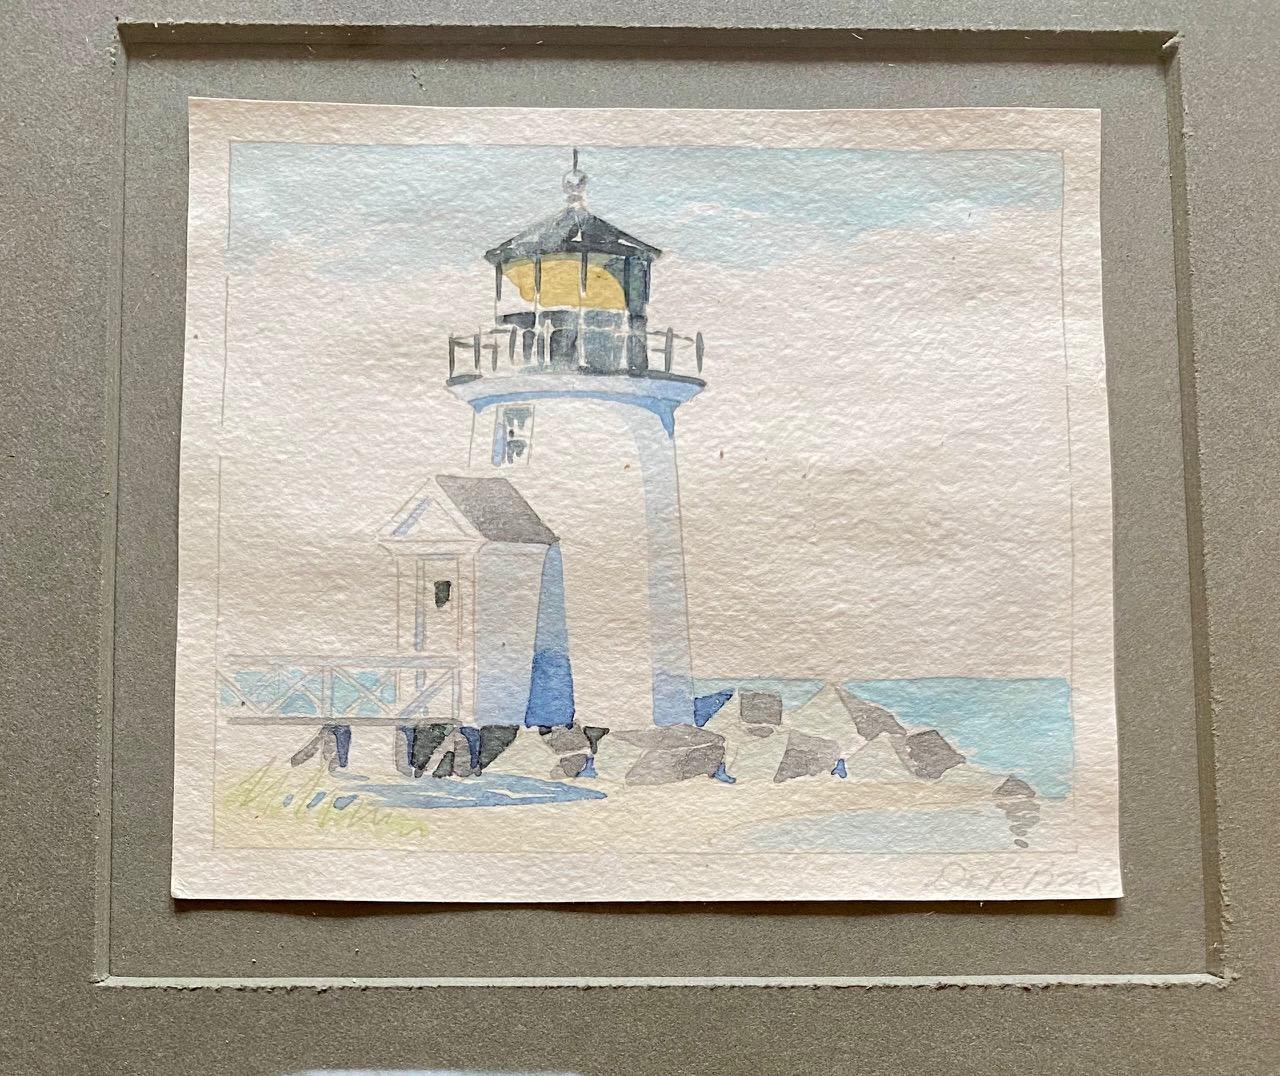 Vintage Nantucket Brant Point Watercolor by Doris & Richard Beer, circa 1940, a watercolor on paper view of Captain's Houses, signed in pencil lower right. Doris and Richard Beer (1898-1967 and 1893-1959 respectively) produced a well-known series of